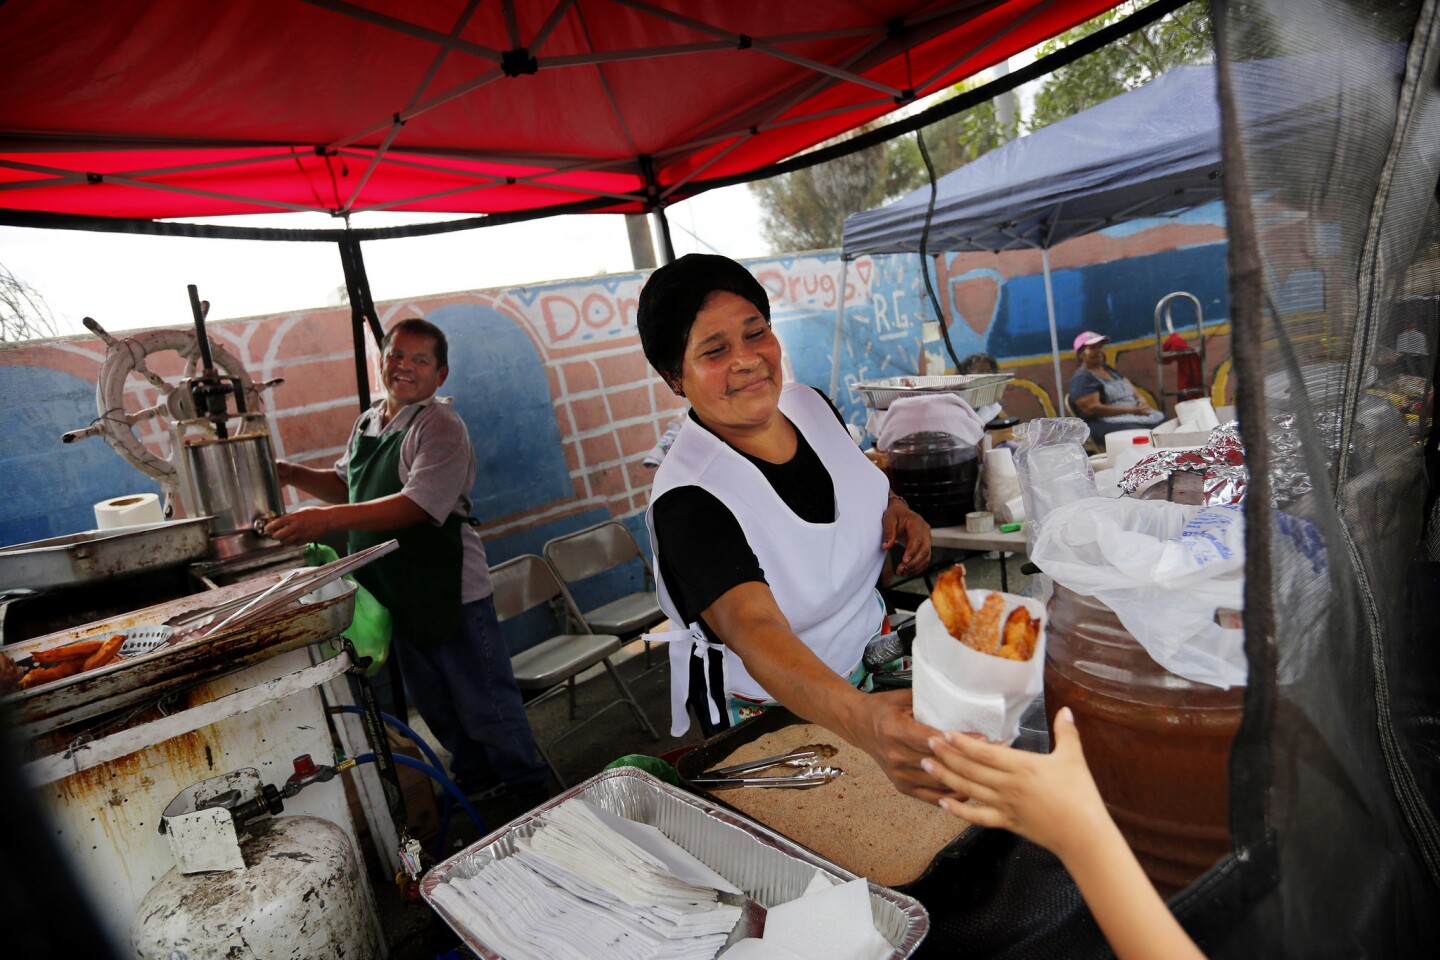 Vendors make churros to be sold for one dollar on Saturday at Ramona Gardens.